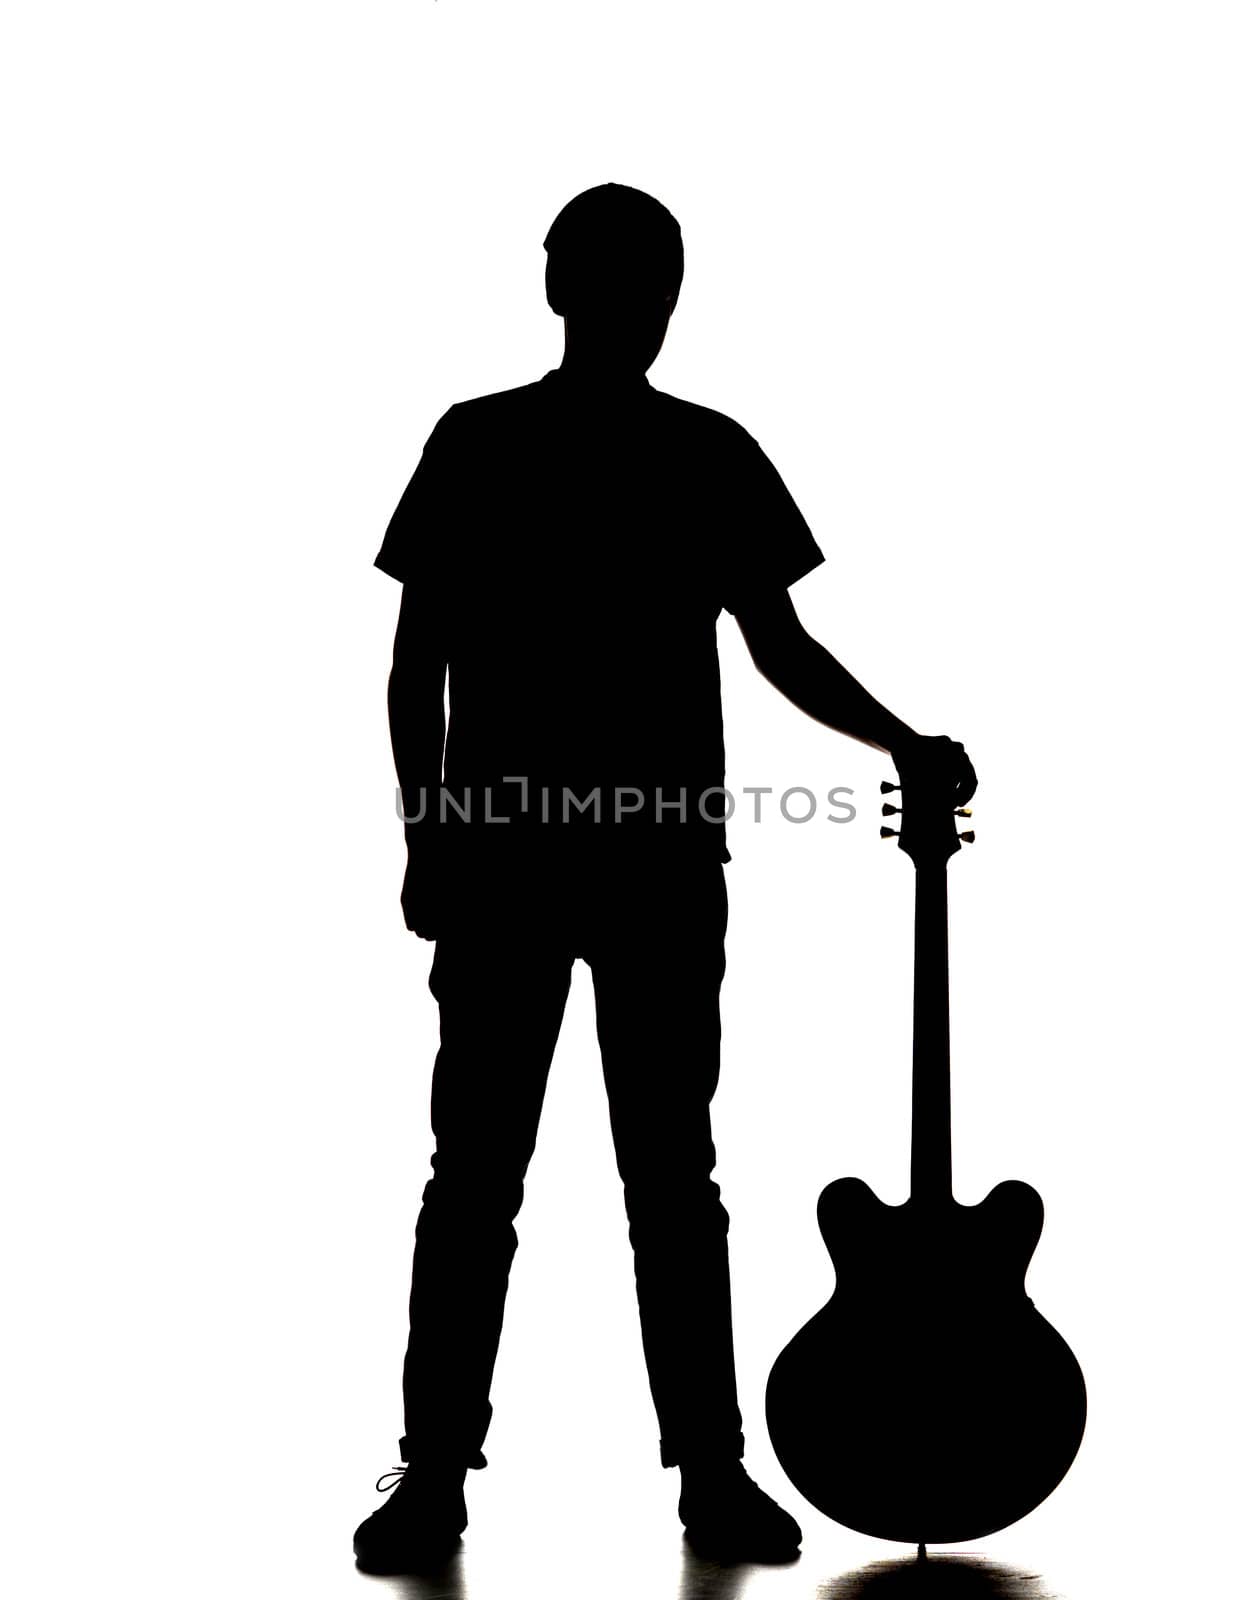 silhouette of a man playing guitar